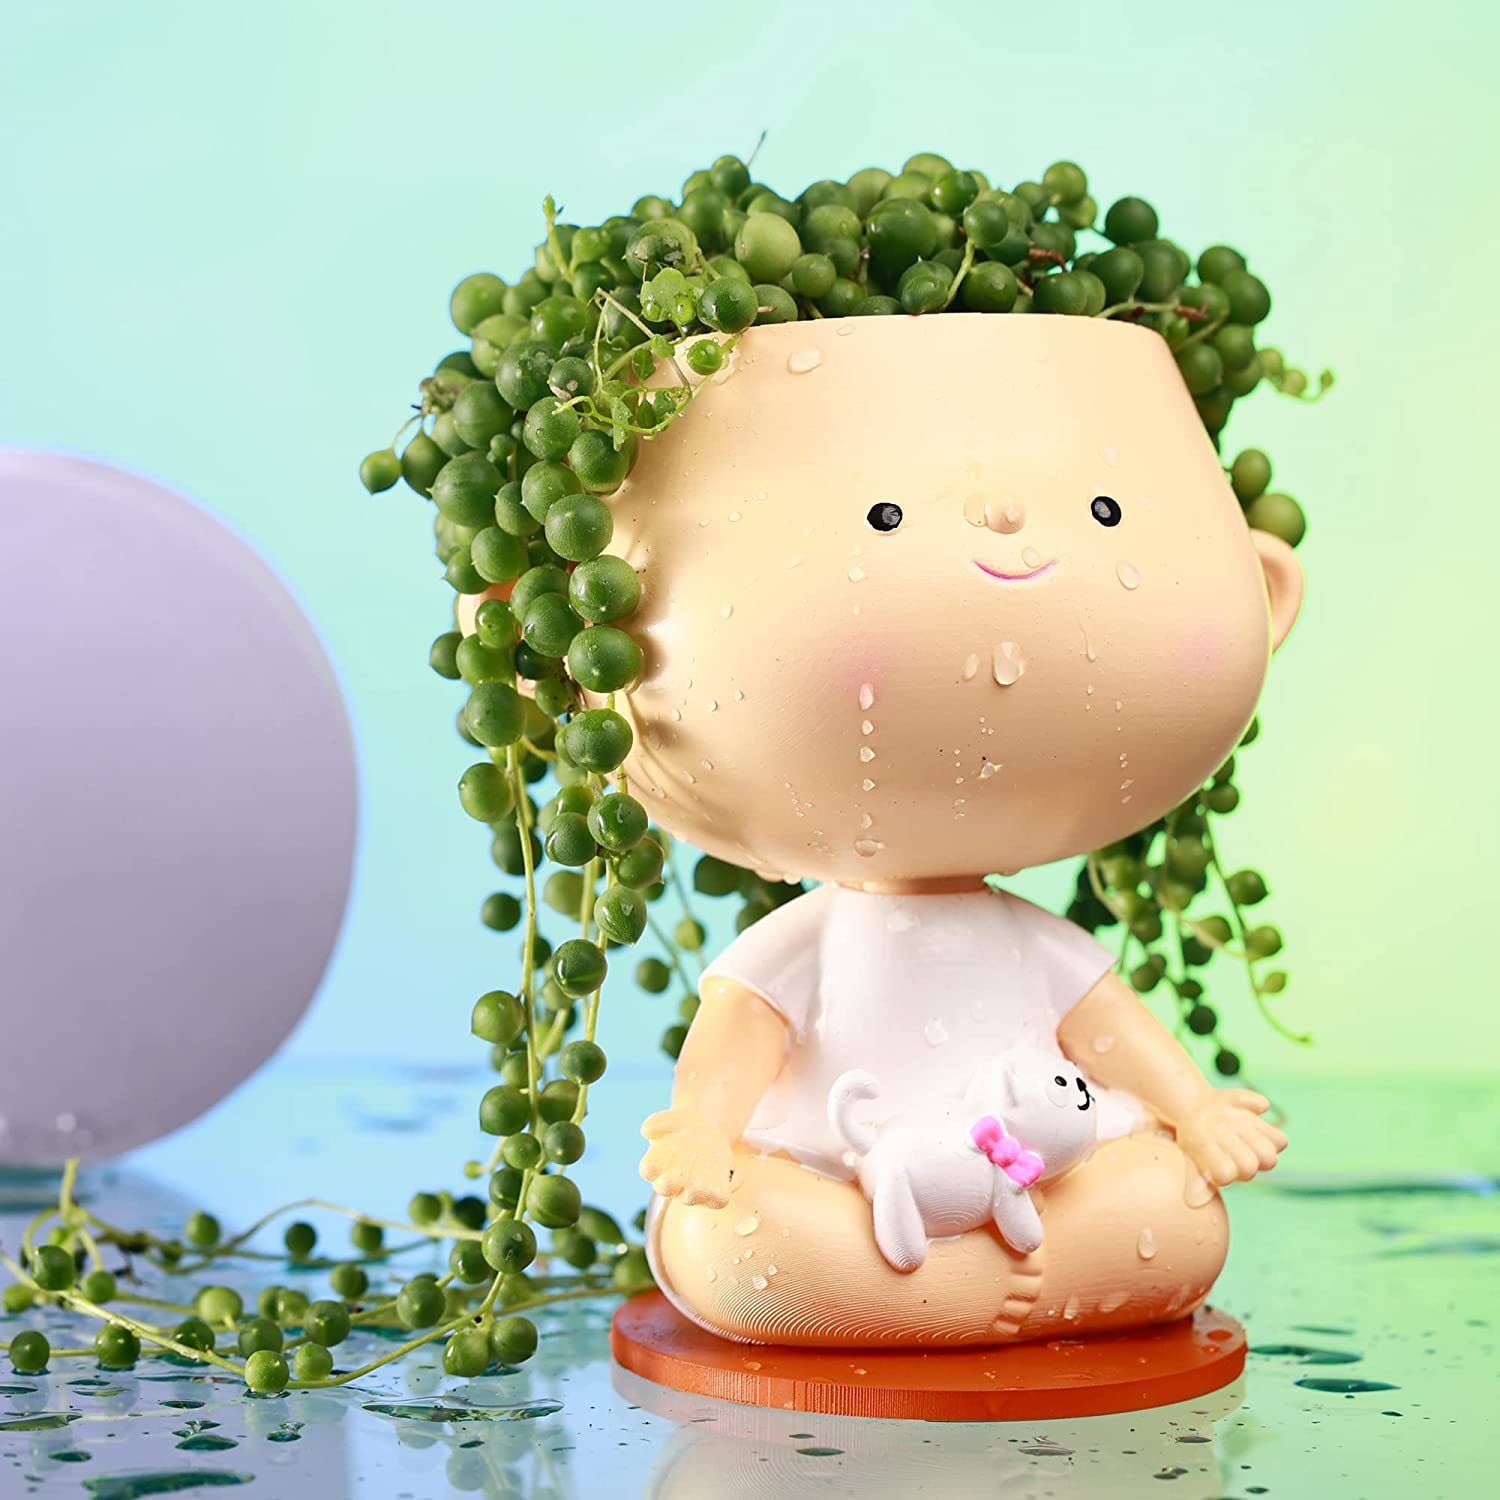 Primary image for Cute Yoga Girl 3D Printed Self-Watering Head Planter.